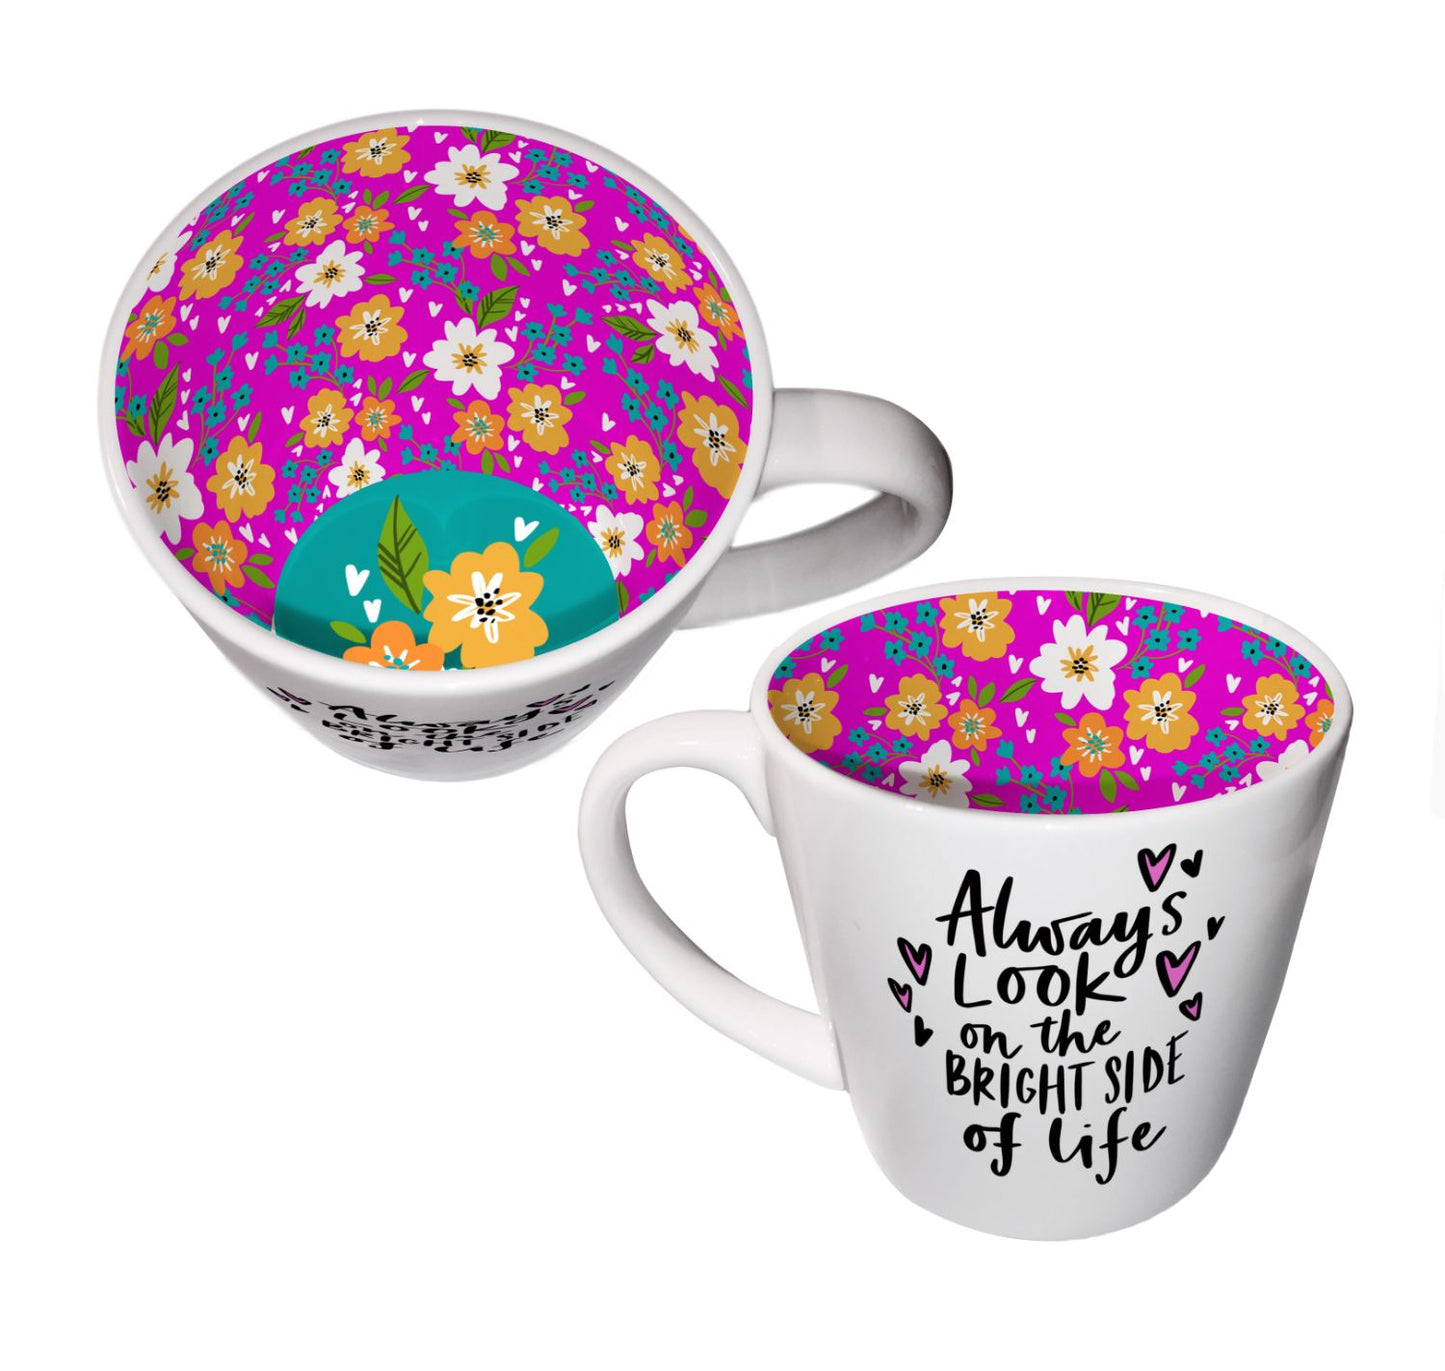 Inside Out Bright Side Of Life Novelty Mug In Gift Box